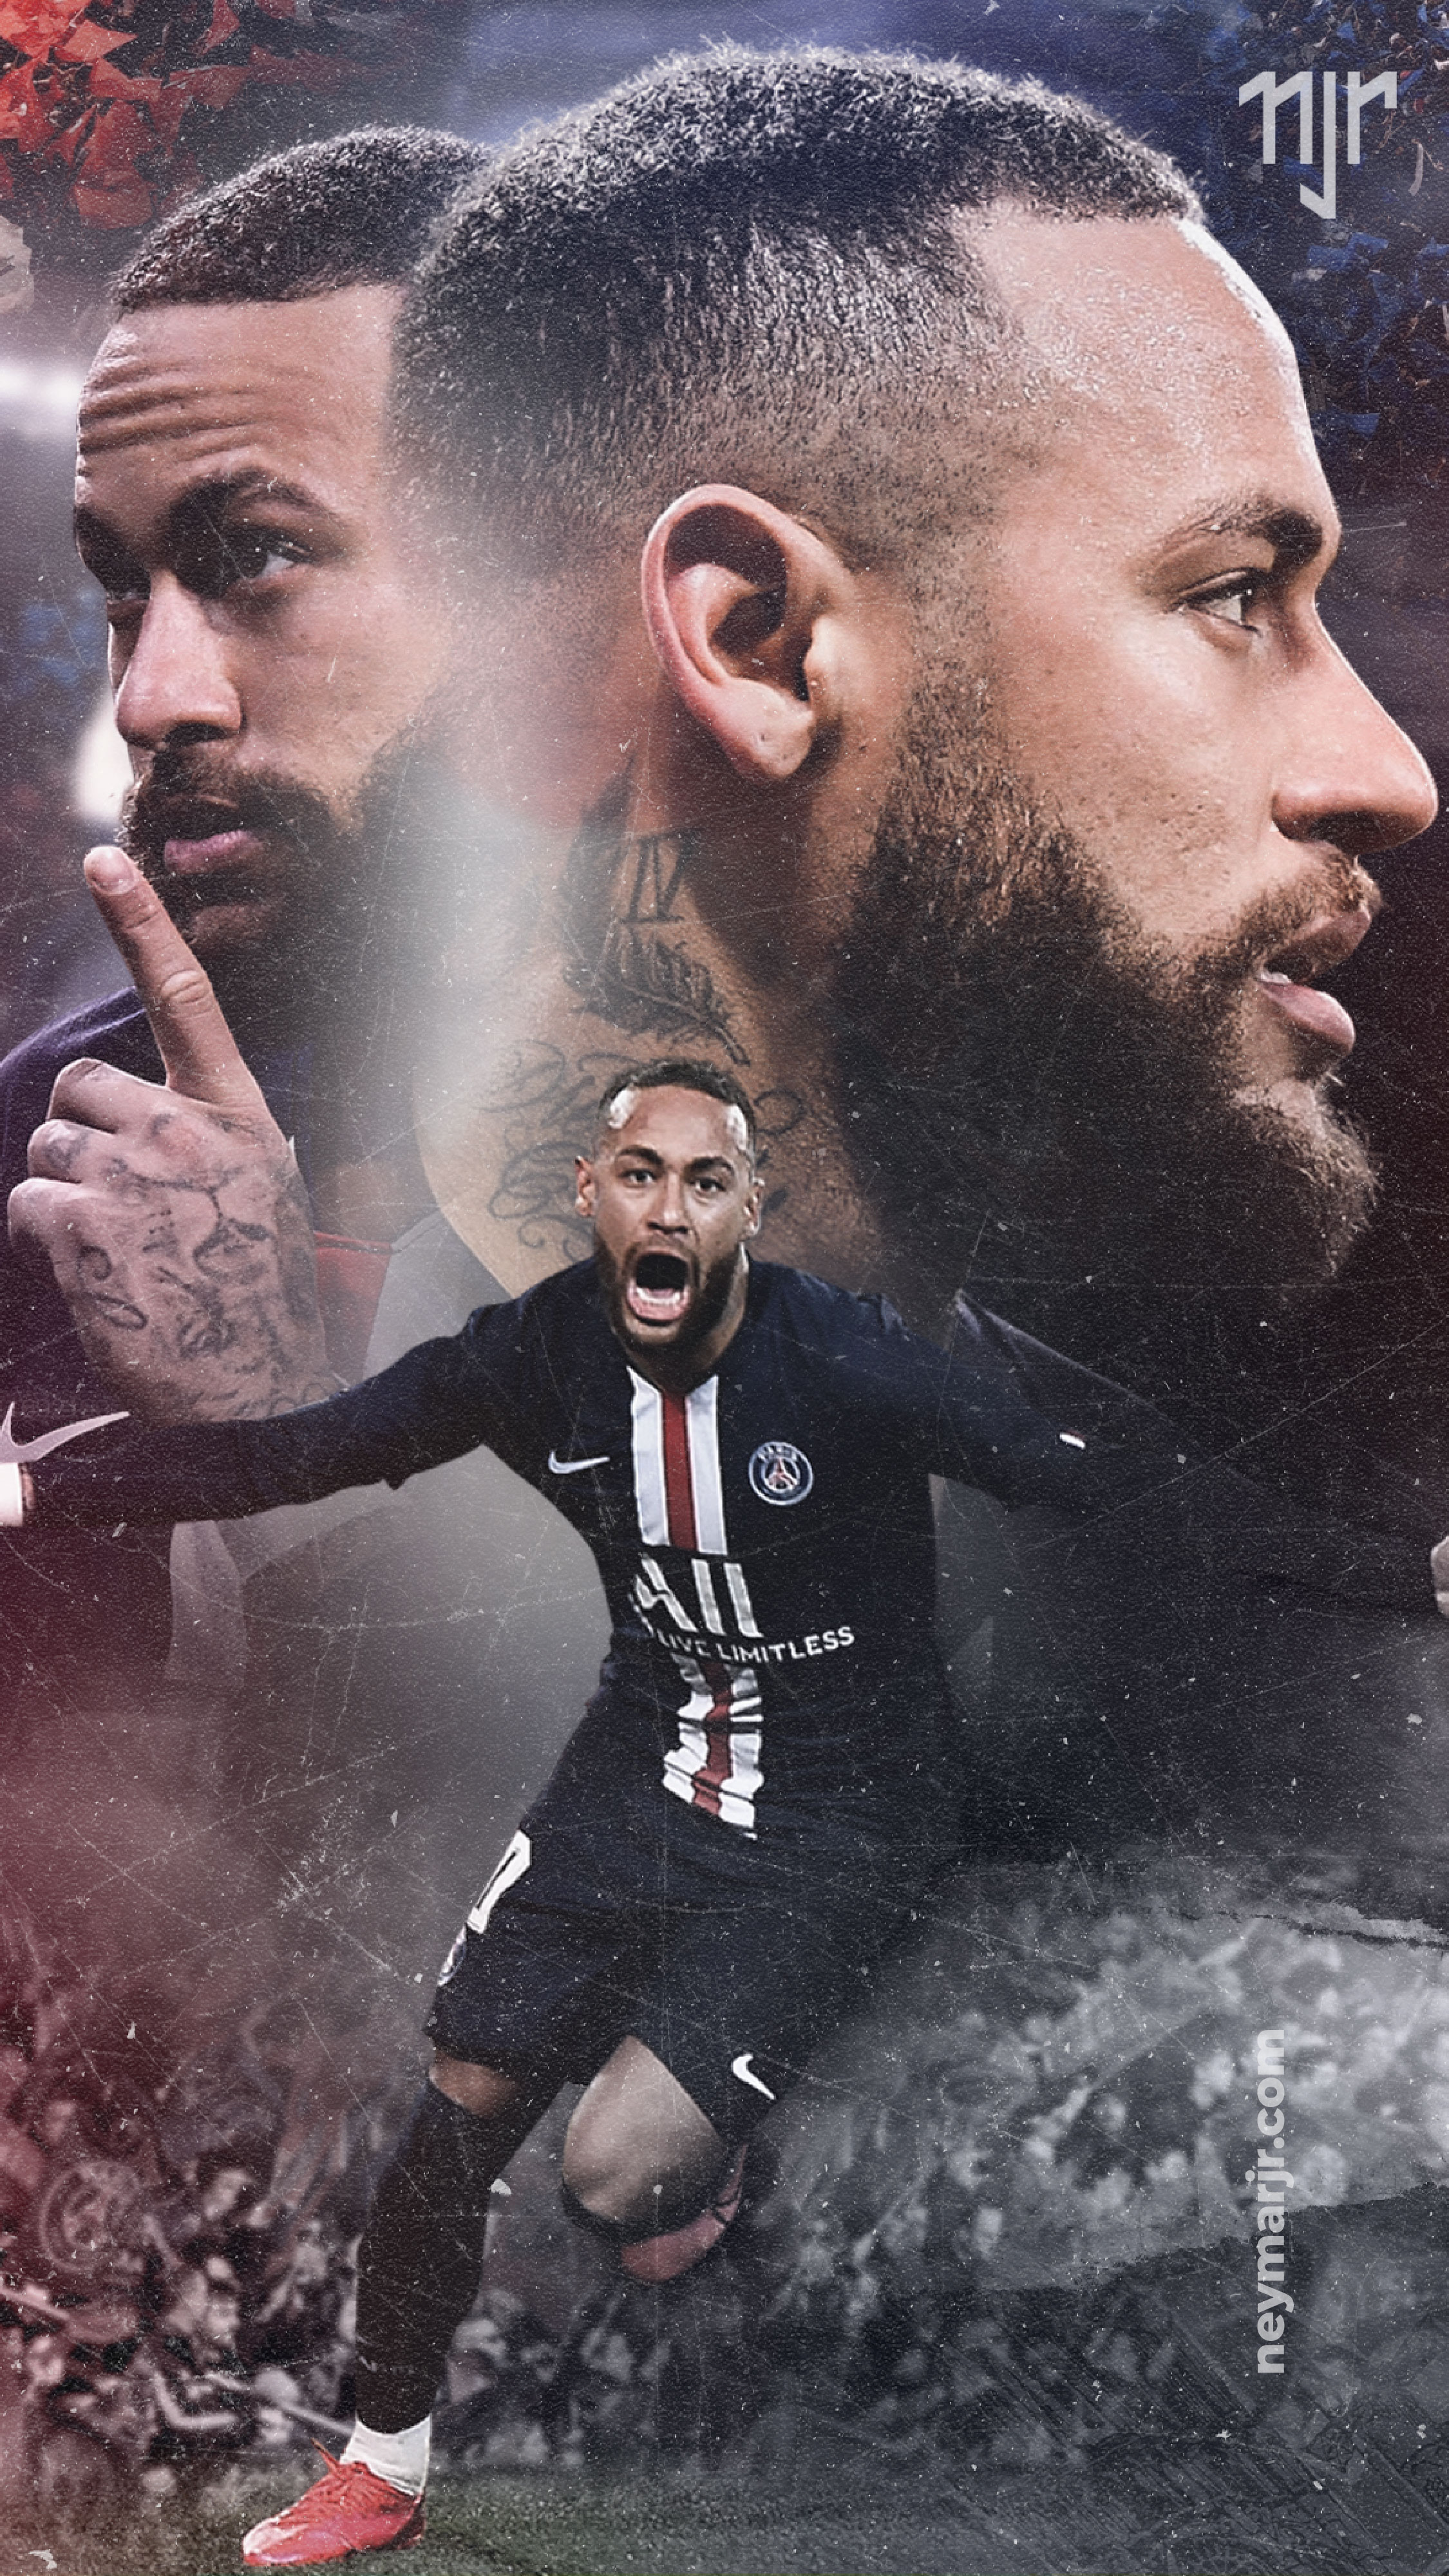 fanaticbuff on Twitter Neymar Jr Wallpaper  iPhone  Android  For  More Wallpapers  Click Here httpstco7NxmmG3oaN Neymar NeymarJr  Iphone Football Android Messi𓃵 Brazil PSG httpstcoHkaU7atIoC   Twitter